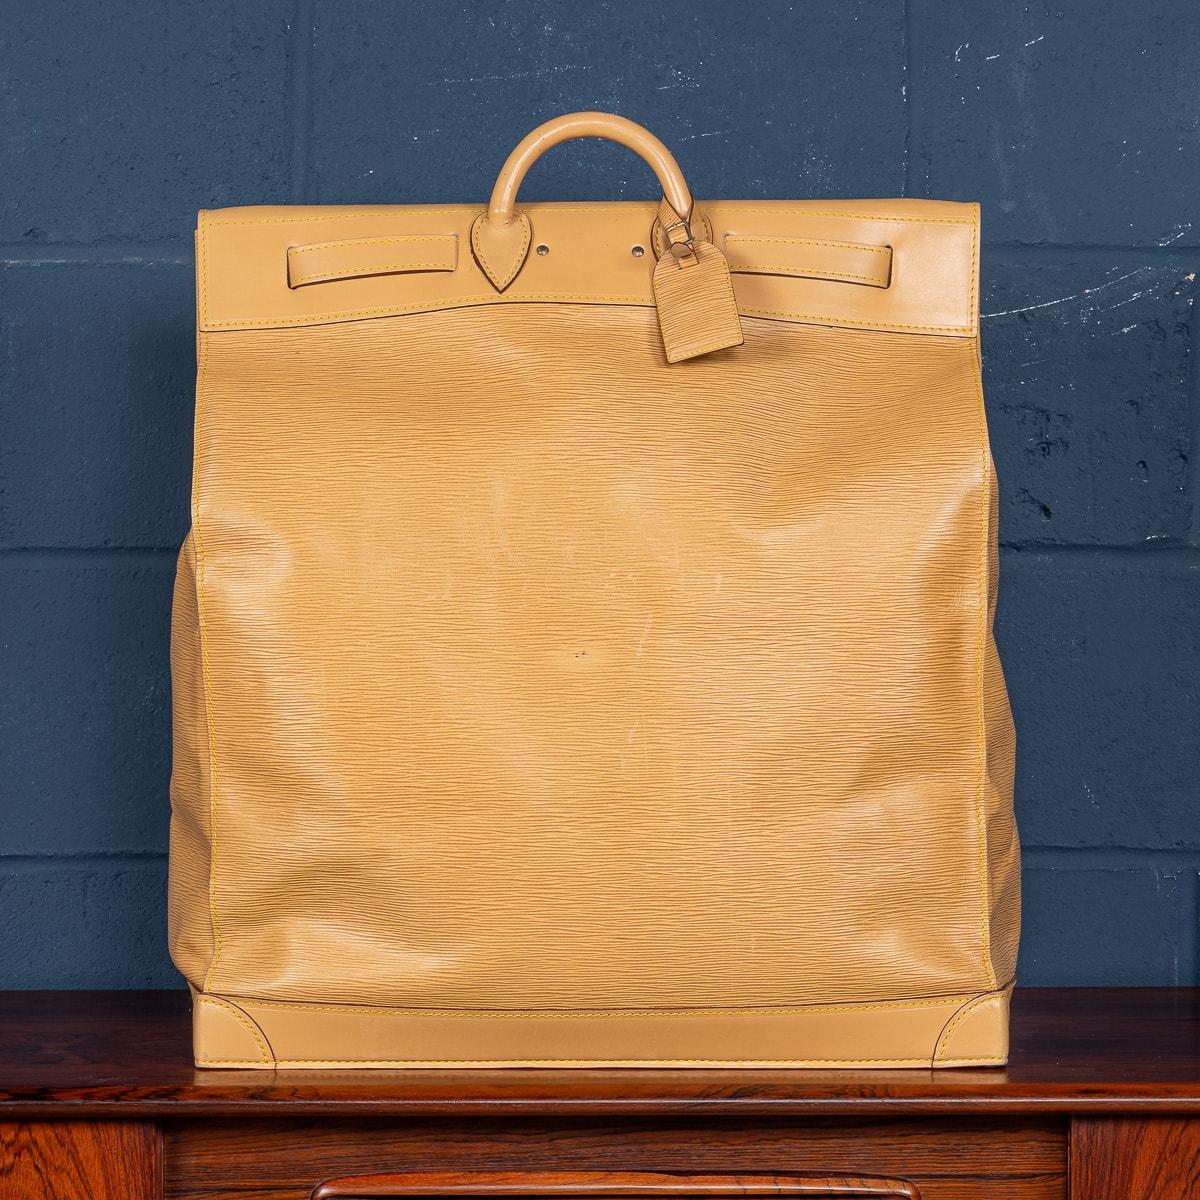 Late 20th Century 20th Century Louis Vuitton Steamer Bag In Epi Leather Canvas, Made In France